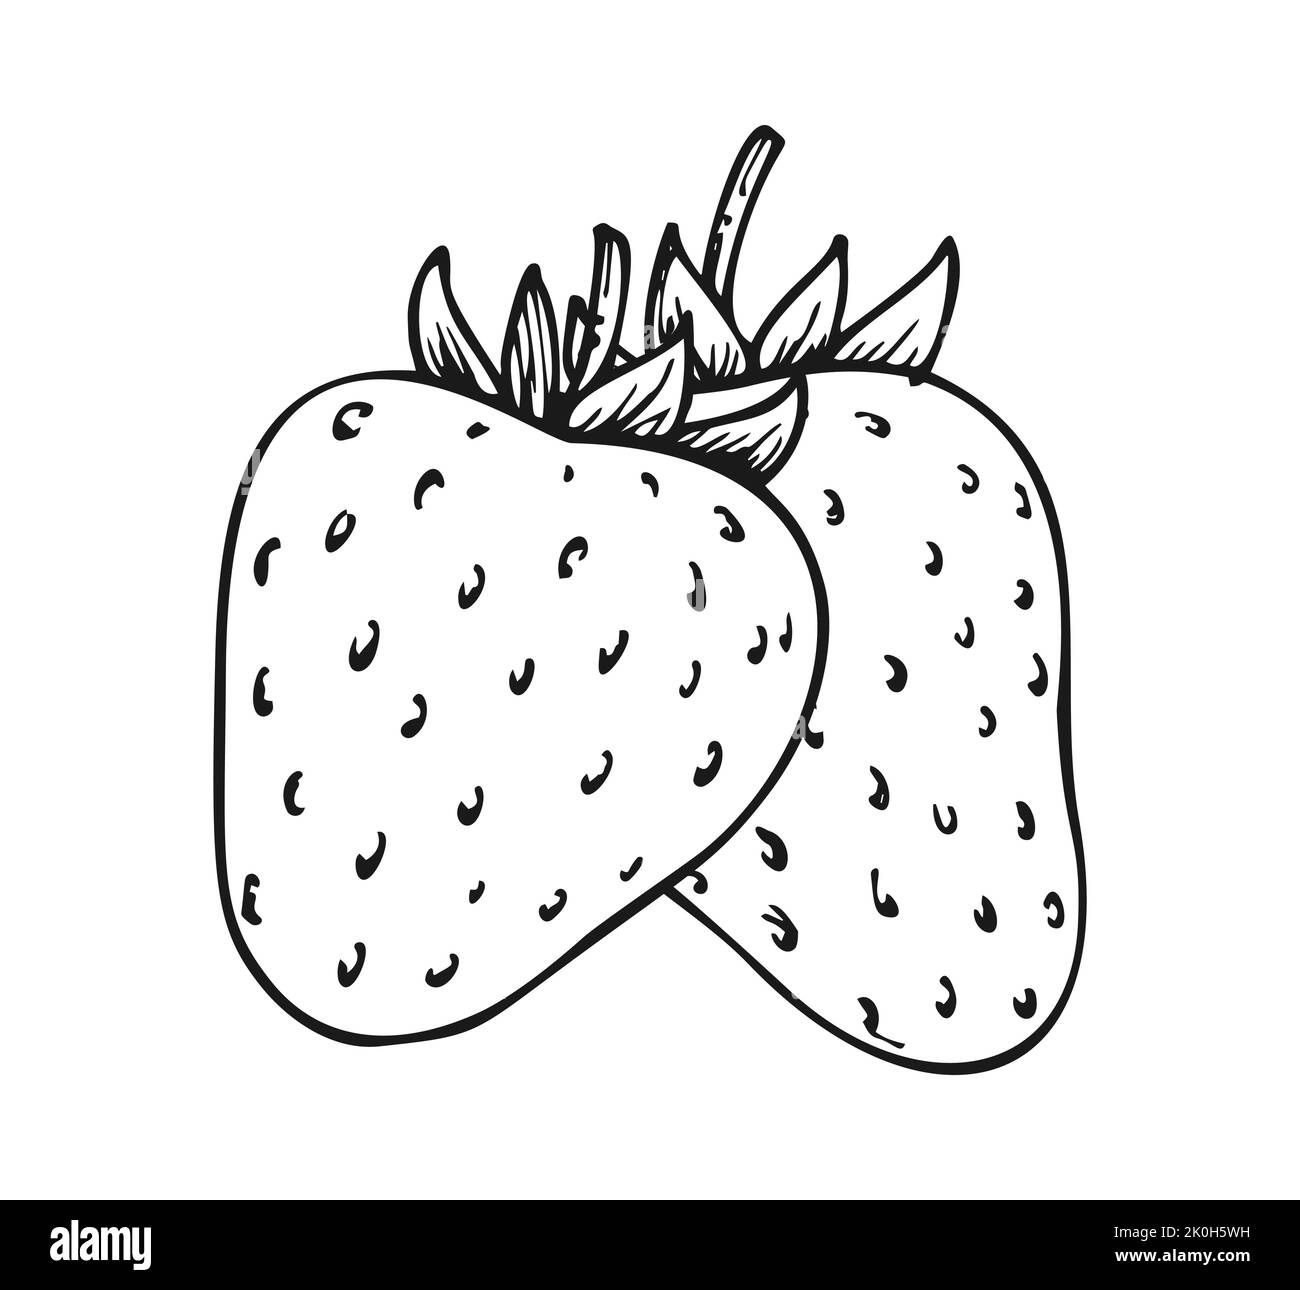 Strawberry group of two berries. Children and adults coloring book page. Whole ripe wild forest berry. Tasty sweet farm fresh organic fruit. Juicy strawberries handdrawn clip art black white sketch Stock Vector